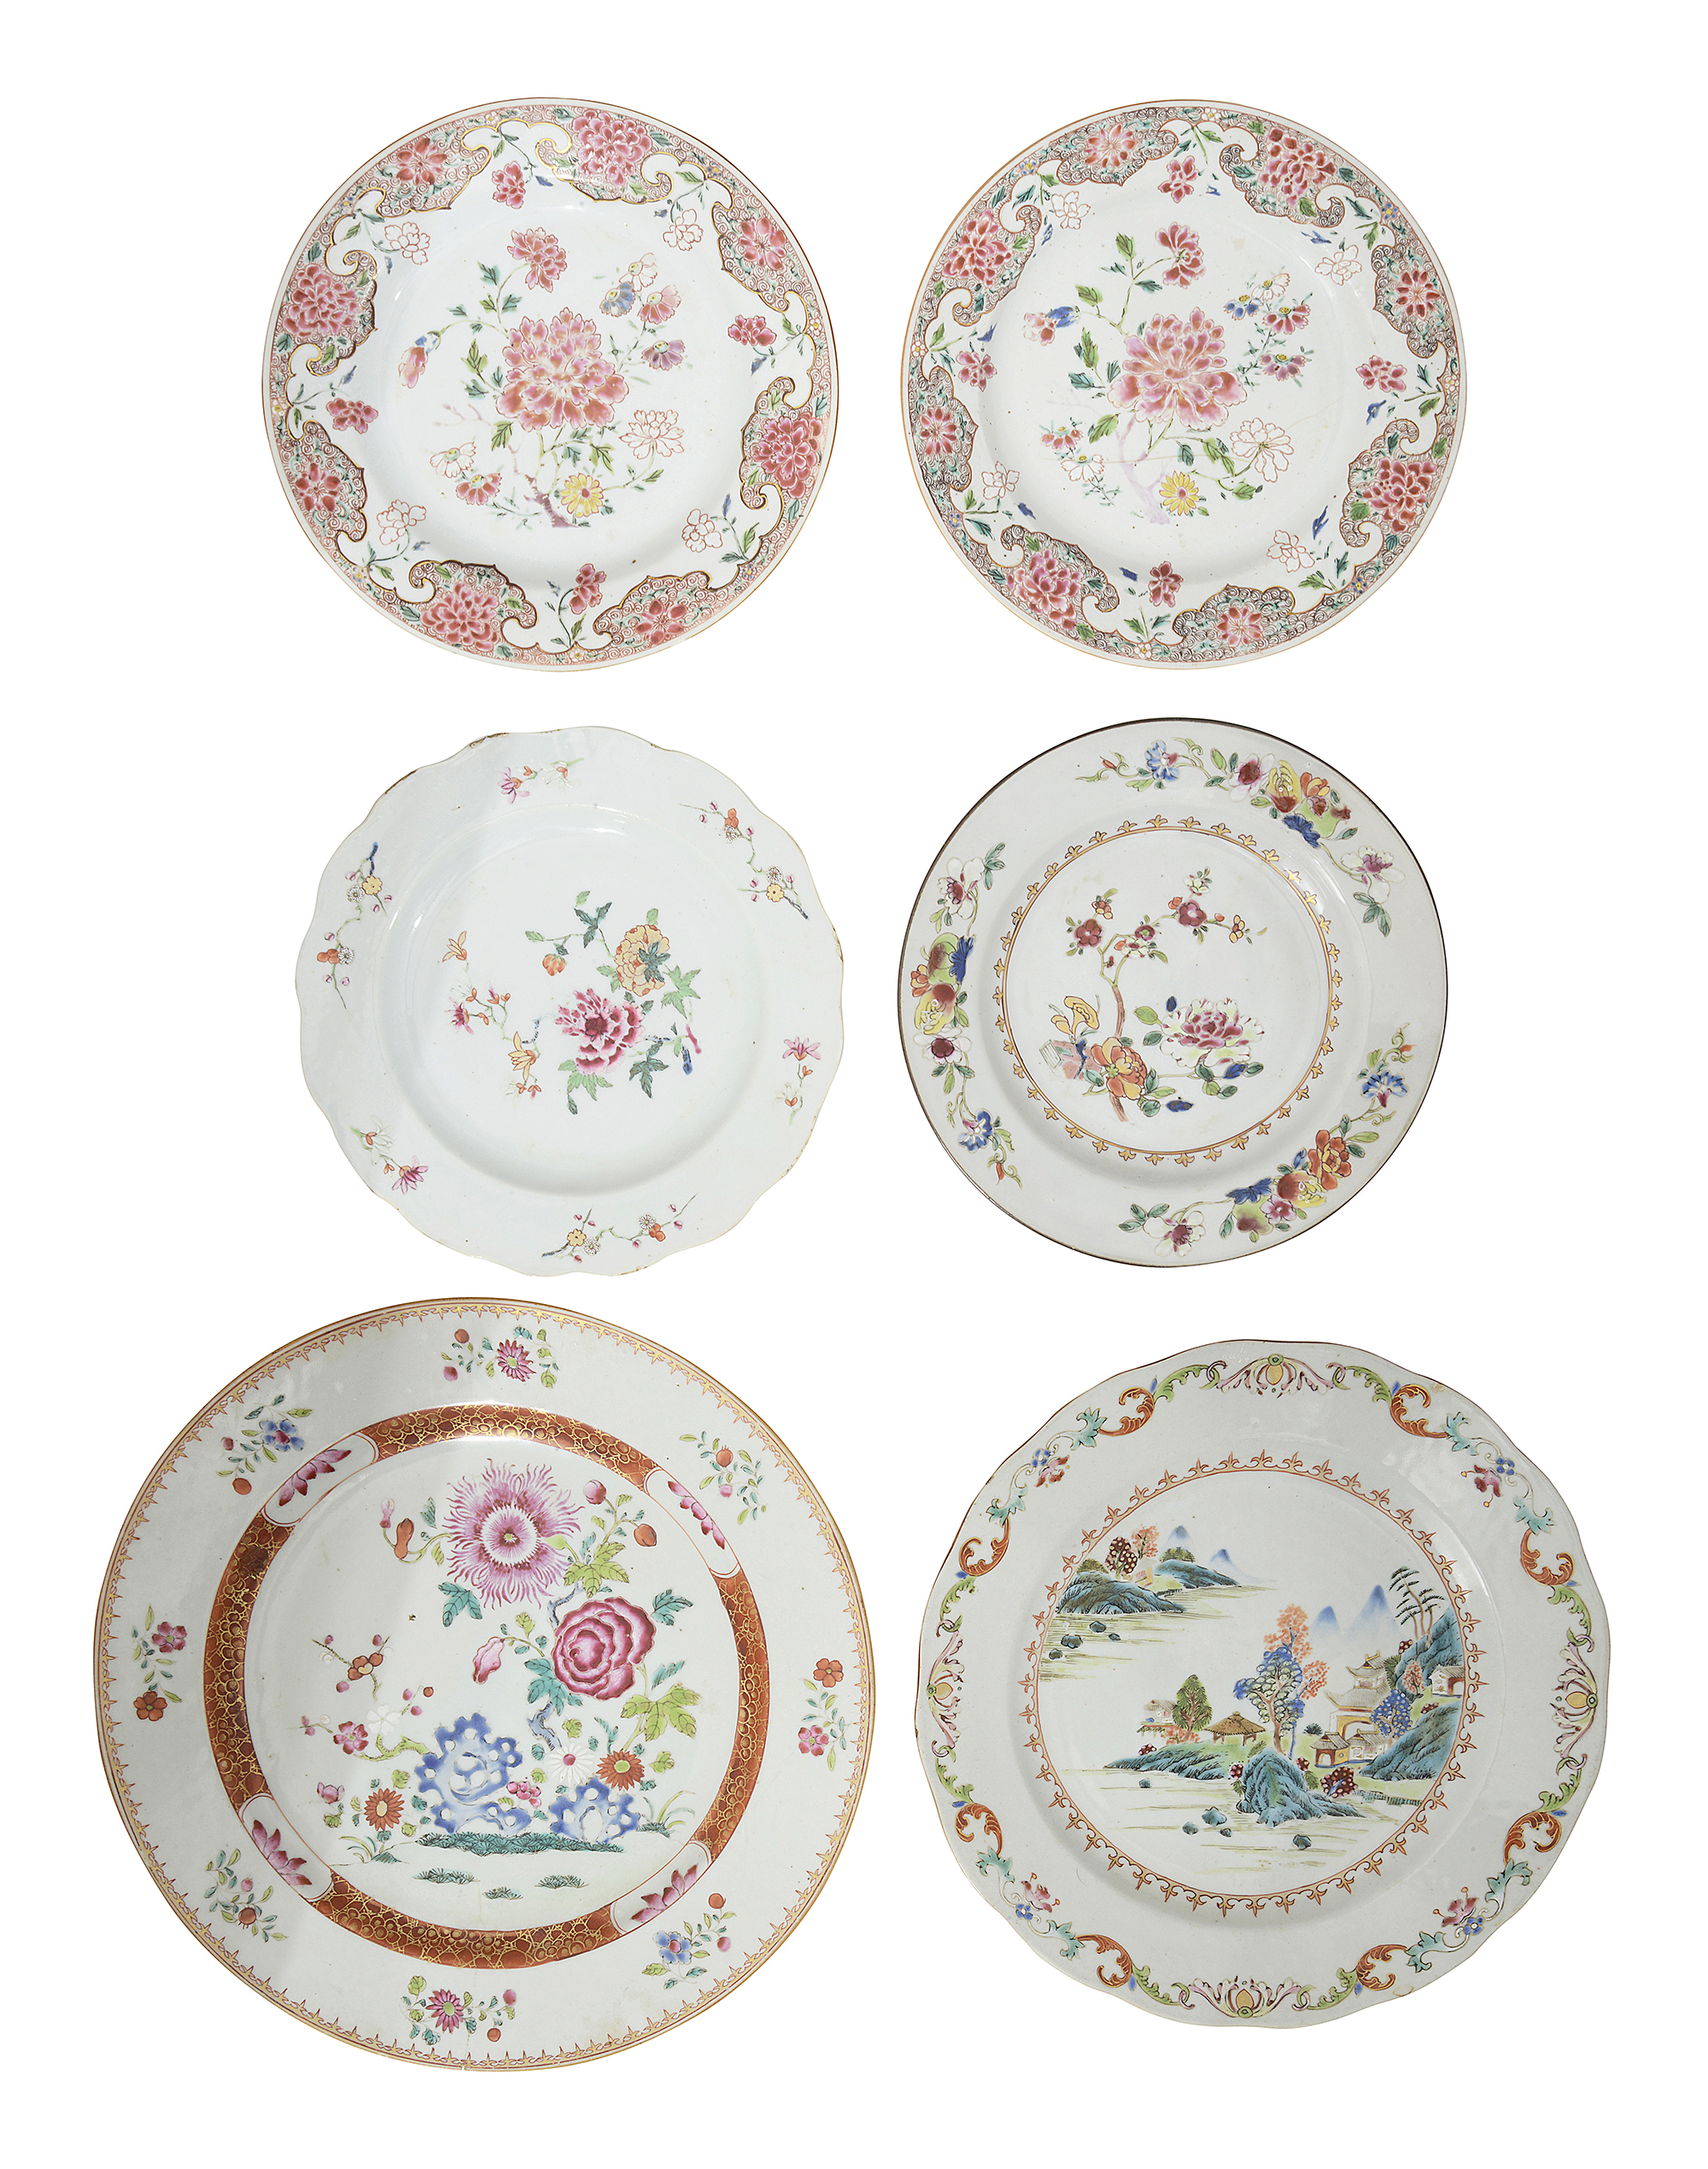 A group of six Chinese famille rose porcelain plates